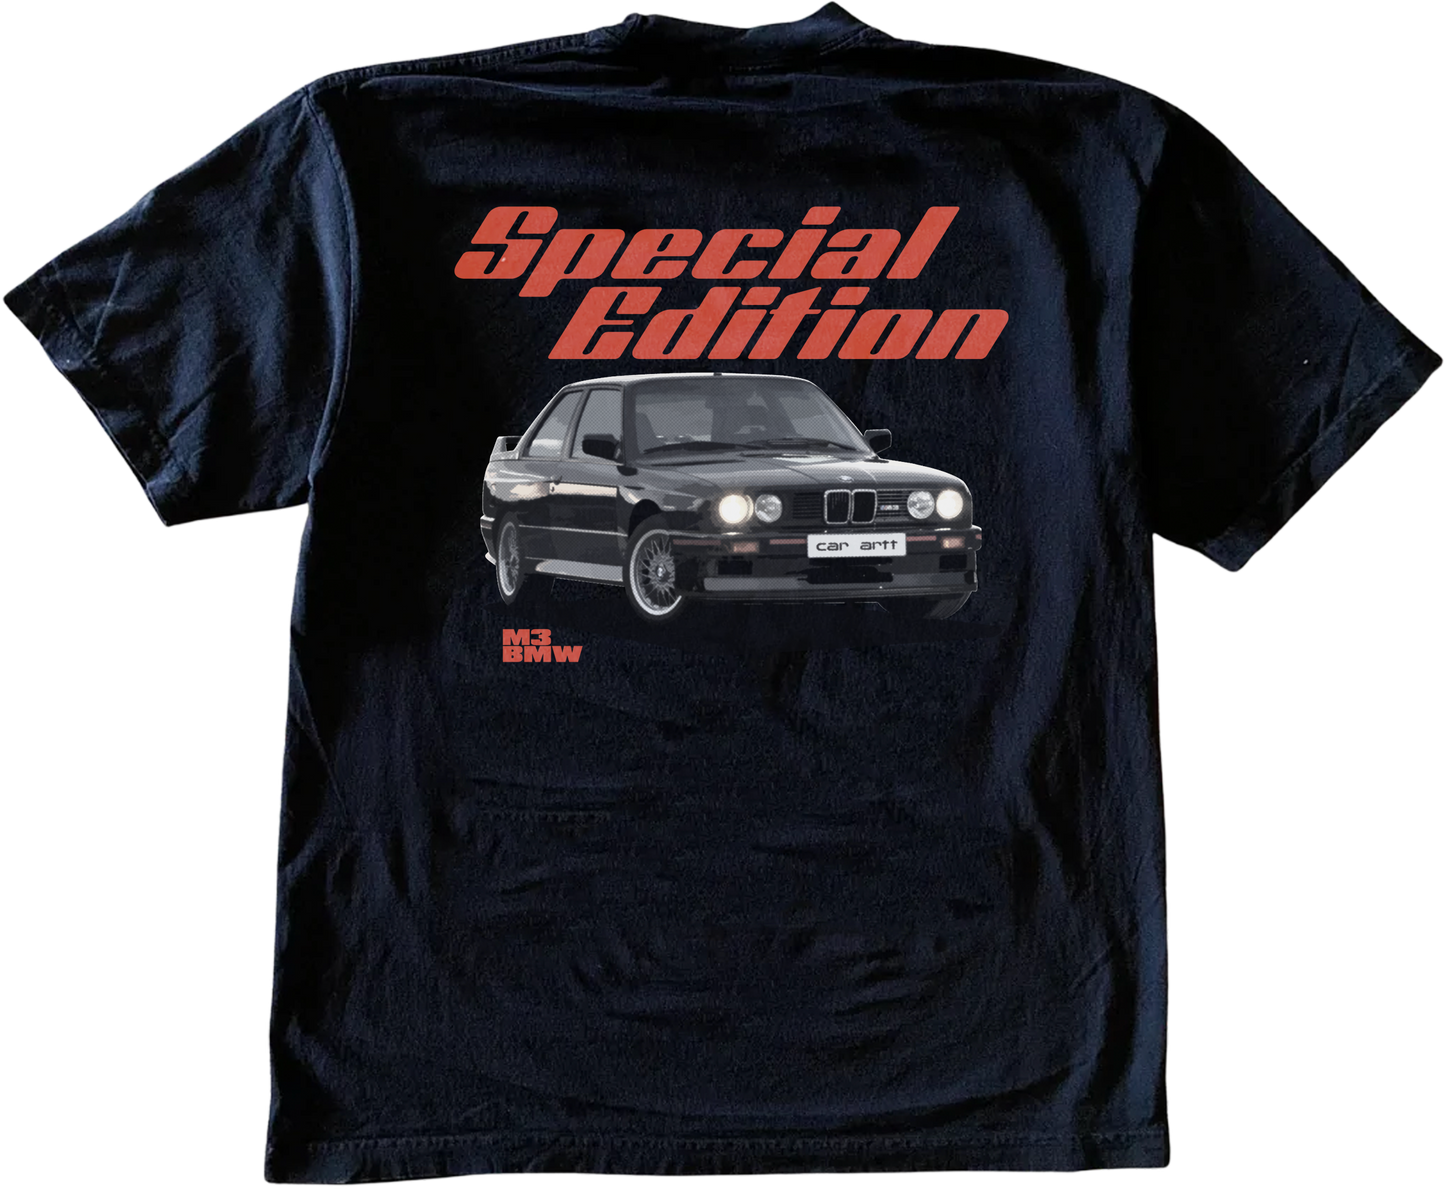 Special Edition E30 Midnight Tee